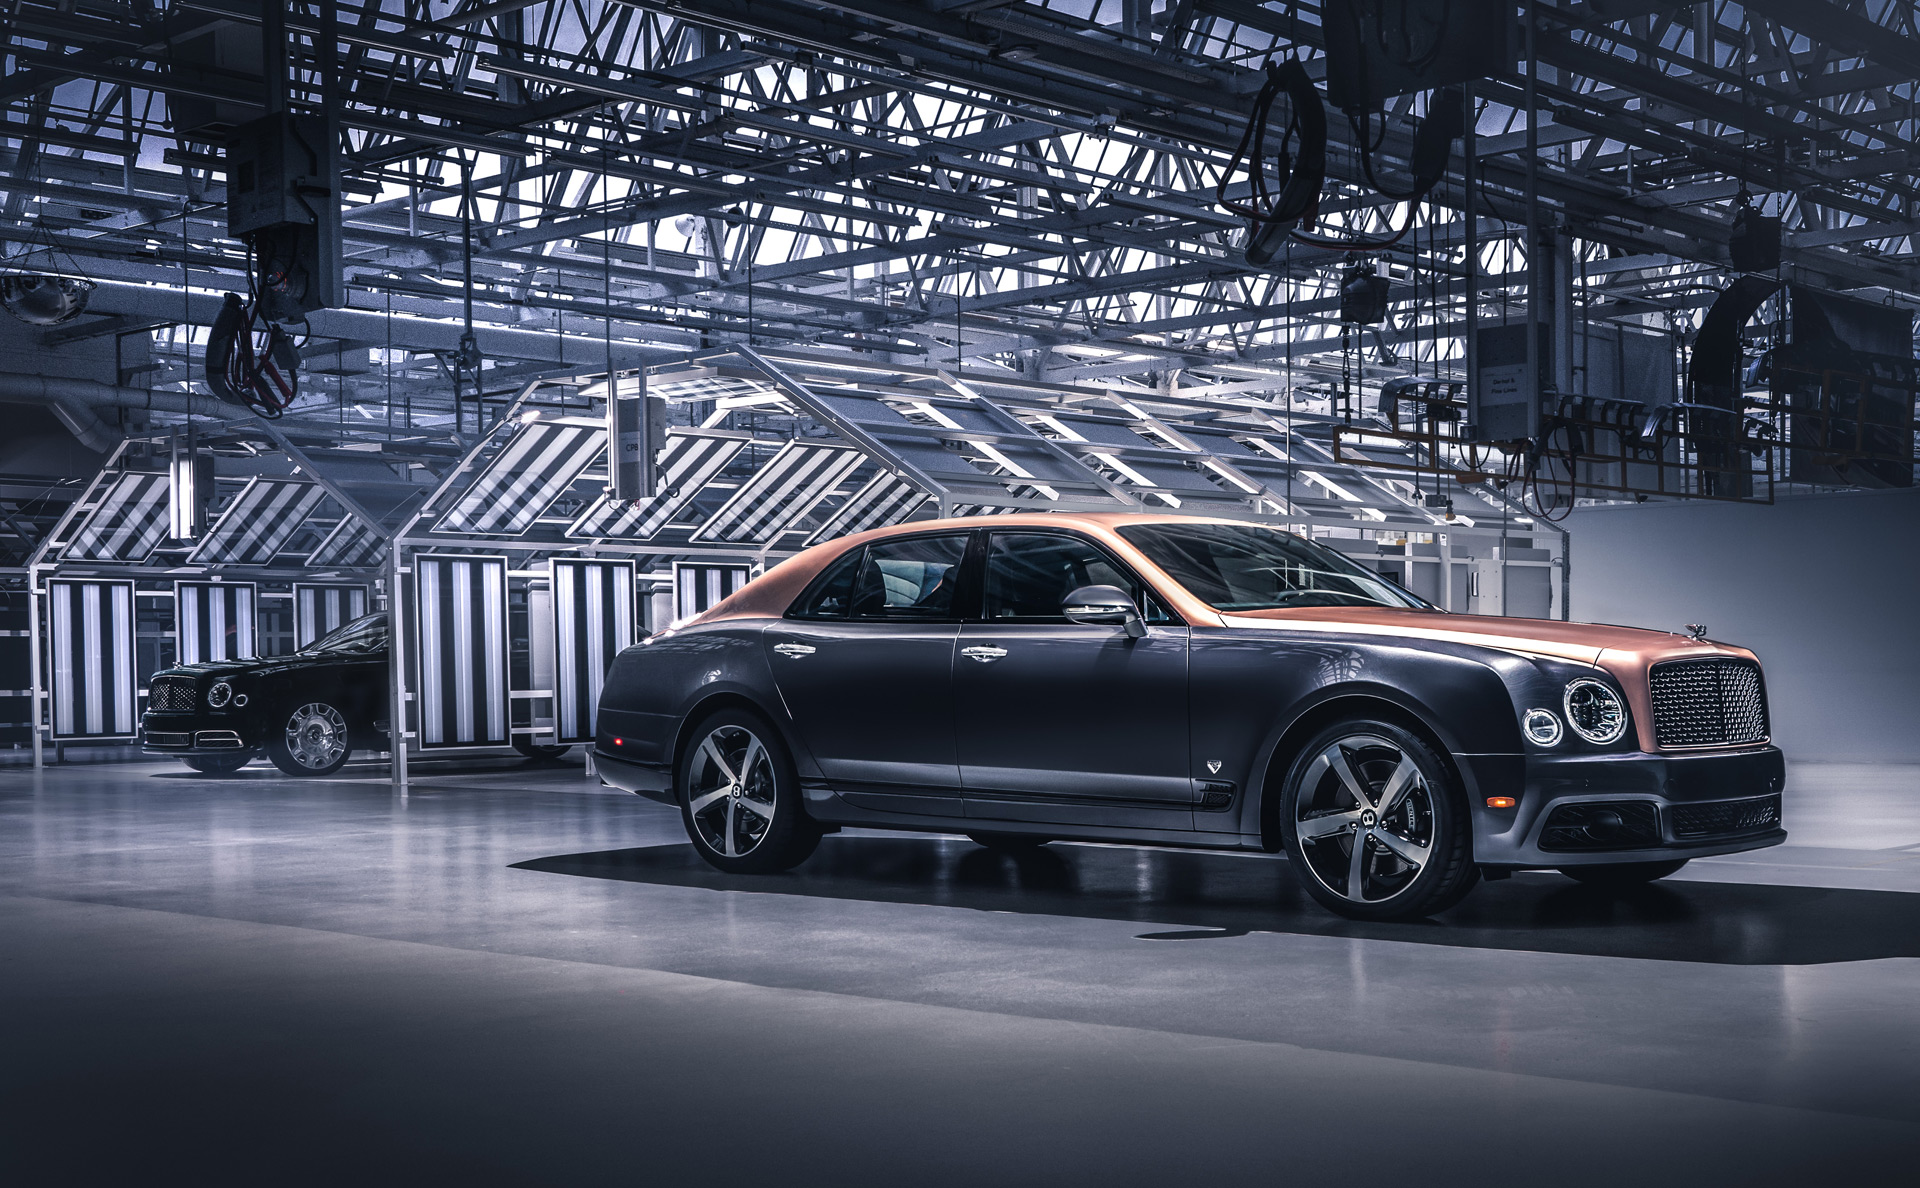 bentley-mulsanne-production-comes-to-an-end--june-2020_100750052_h.jpg